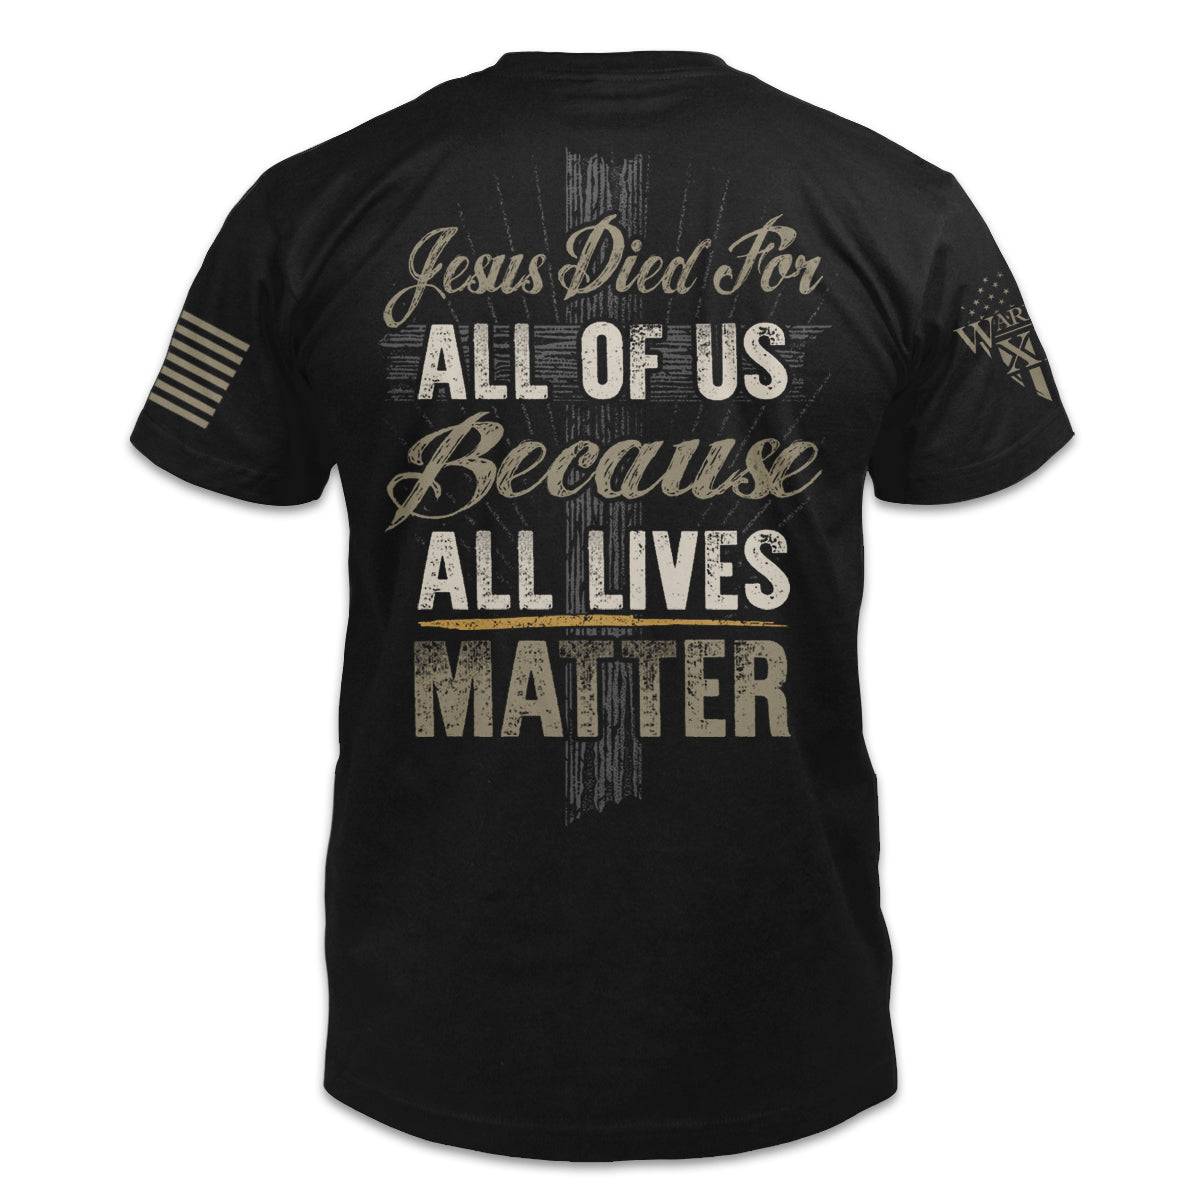 A black t-shirt with "Jesus died for all of us because ALL LIVES matter" printed on the back of the shirt.